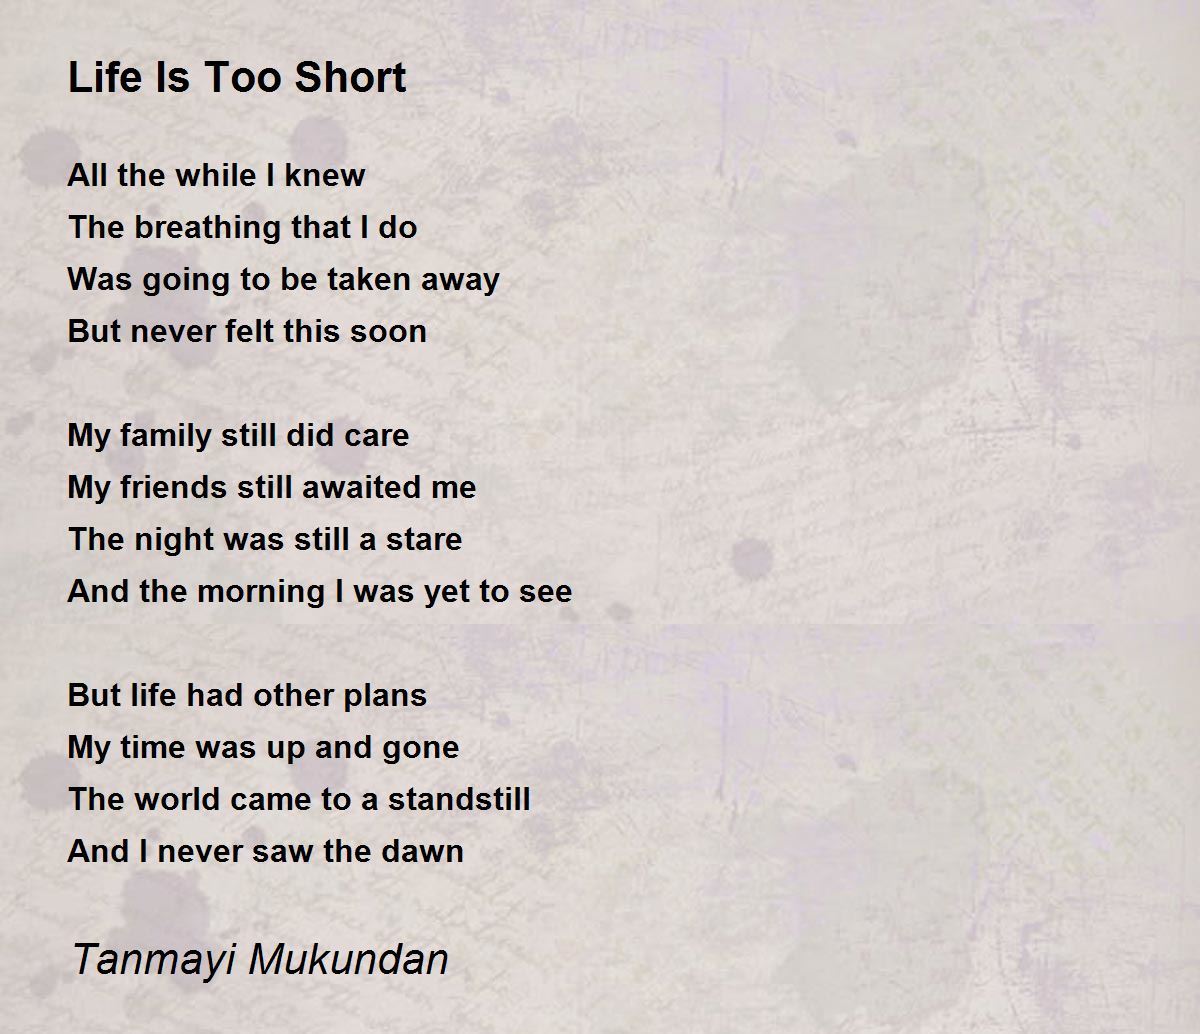 Life Is Too Short - Life Is Too Short Poem by Tanmayi Mukundan